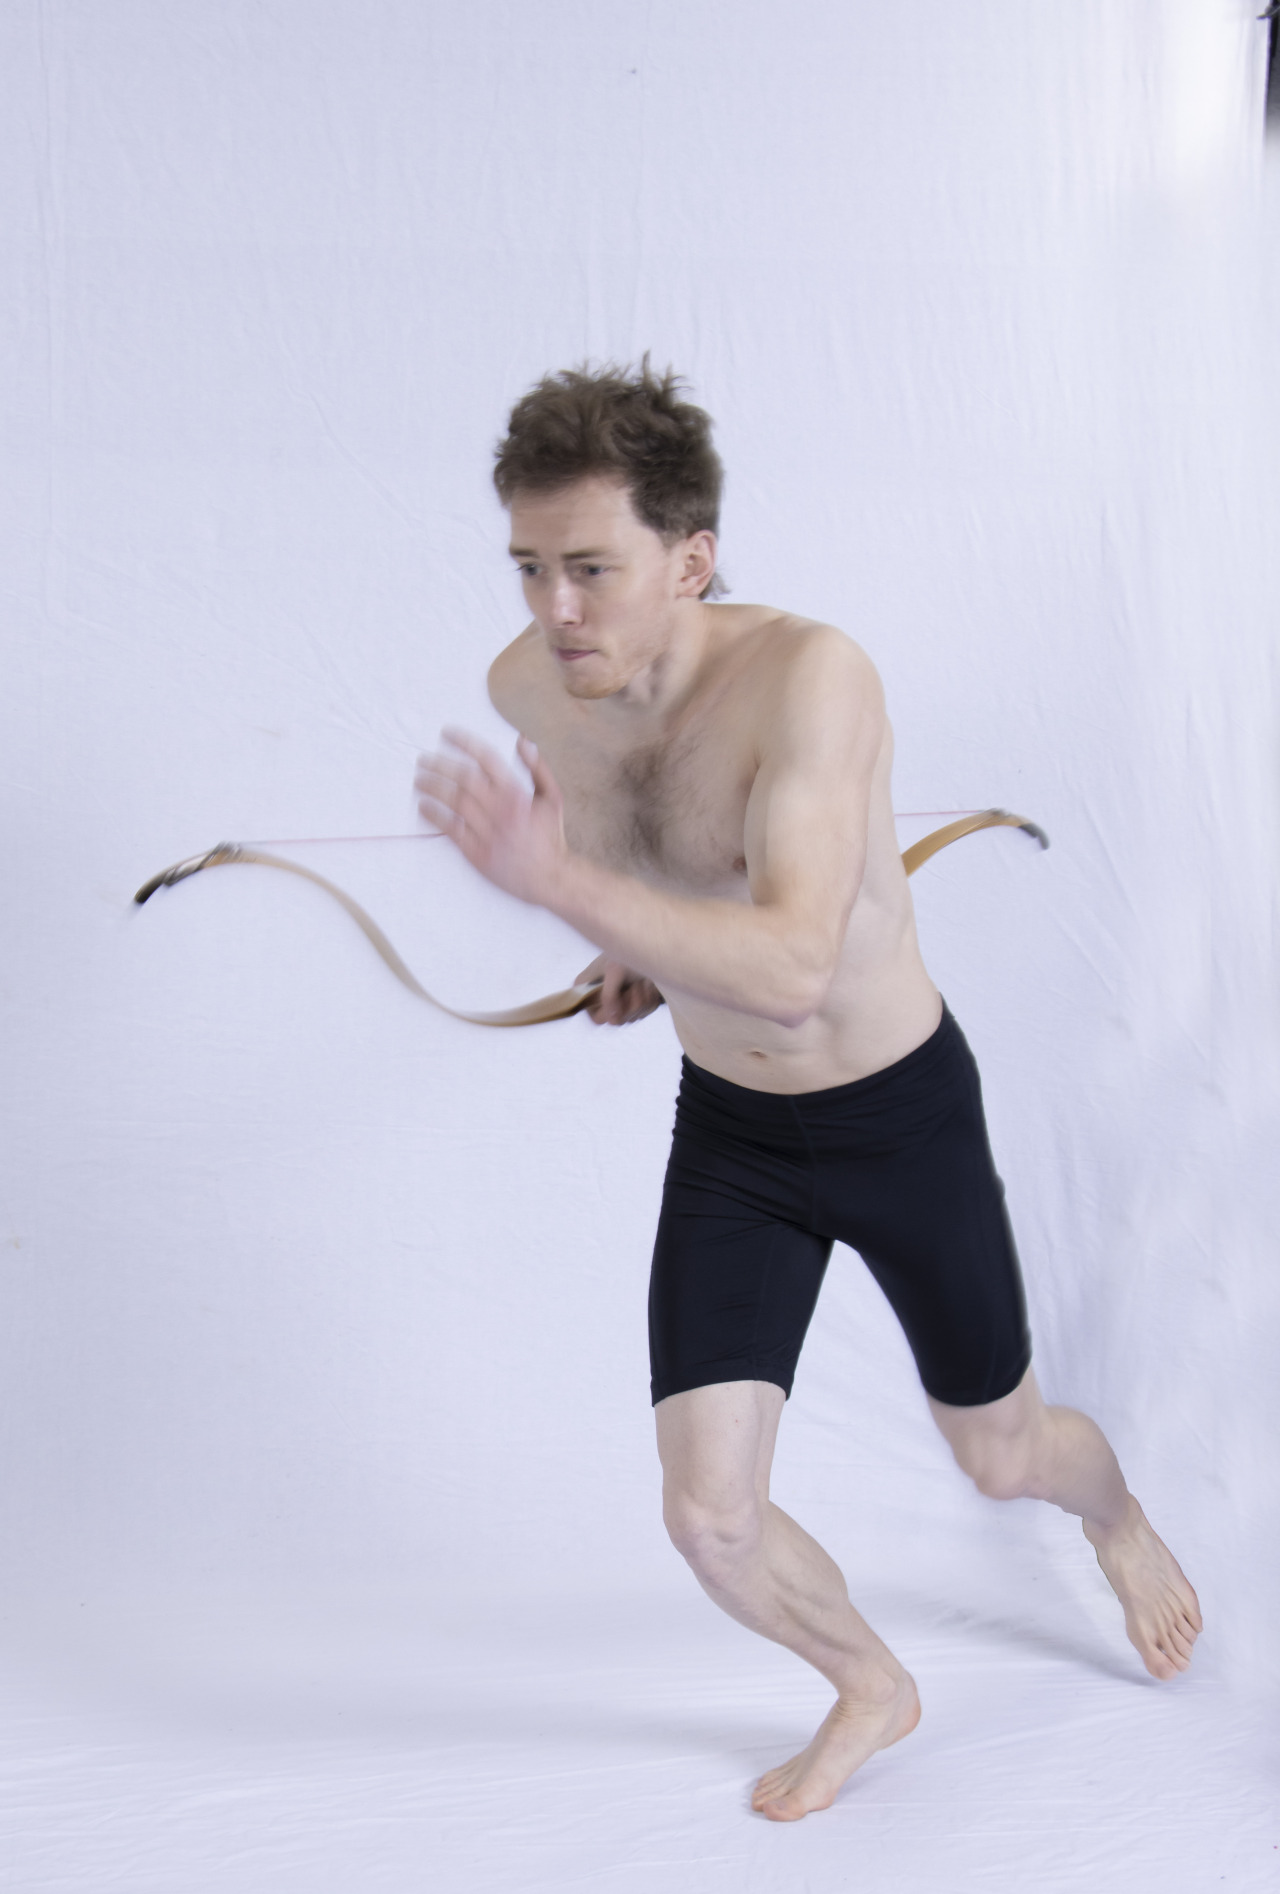 A photograph of a man running while holding a bow